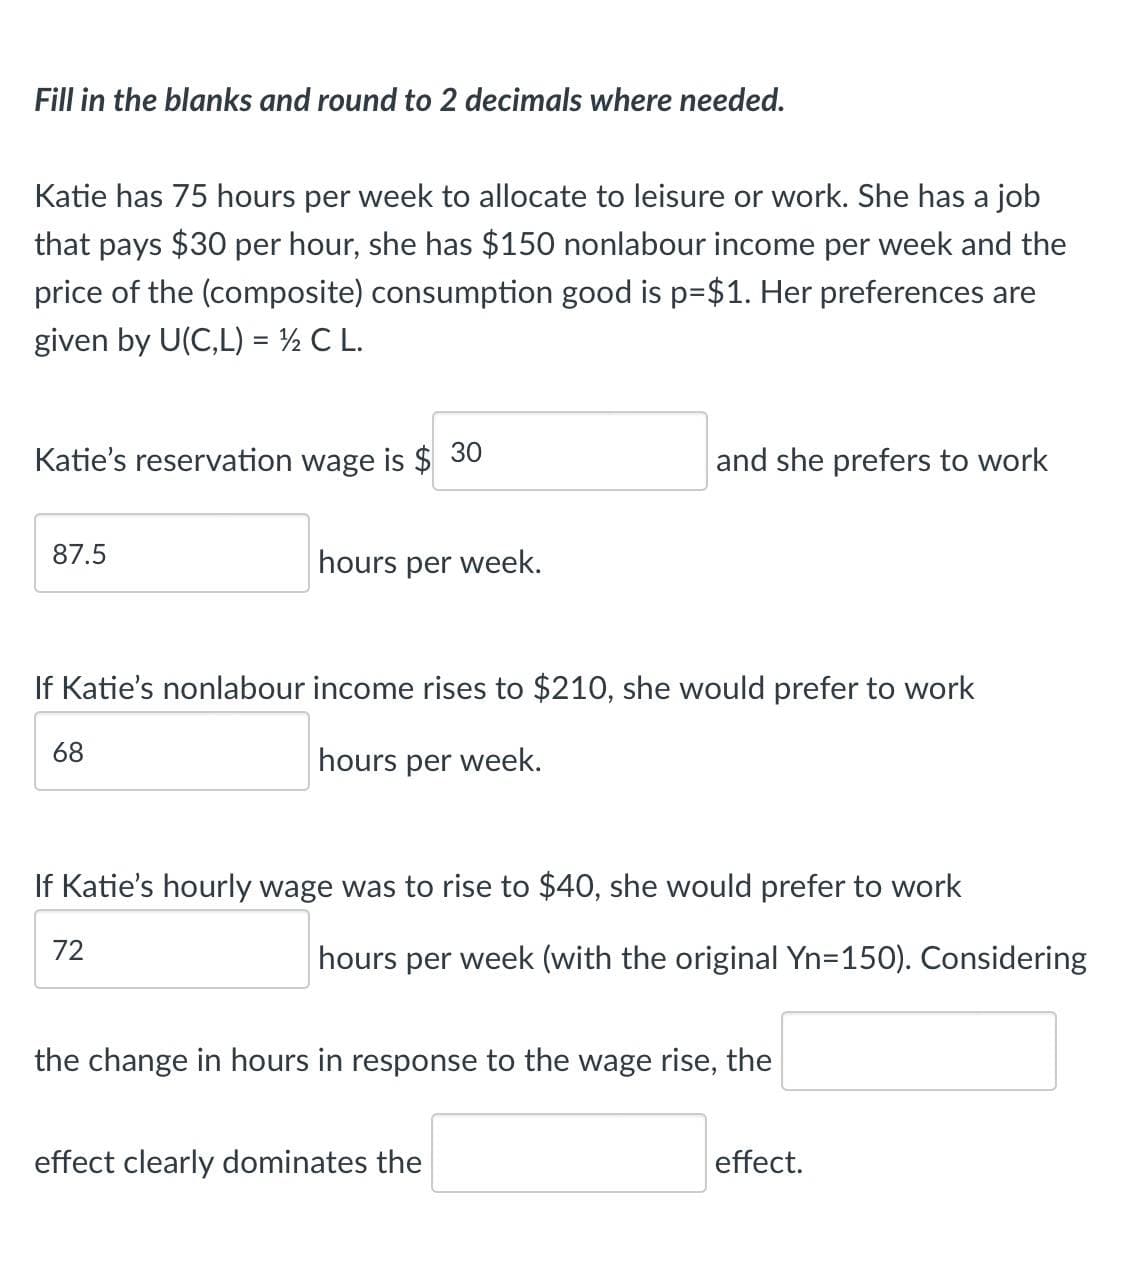 Fill in the blanks and round to 2 decimals where needed.
Katie has 75 hours per week to allocate to leisure or work. She has a job
that pays $30 per hour, she has $150 nonlabour income per week and the
price of the (composite) consumption good is p=$1. Her preferences are
given by U(C,L) = ½ C L.
Katie's reservation wage is $ 30
and she prefers to work
87.5
hours per week.
If Katie's nonlabour income rises to $210, she would prefer to work
68
hours per week.
If Katie's hourly wage was to rise to $40, she would prefer to work
72
hours per week (with the original Yn=150). Considering
the change in hours in response to the wage rise, the
effect clearly dominates the
effect.